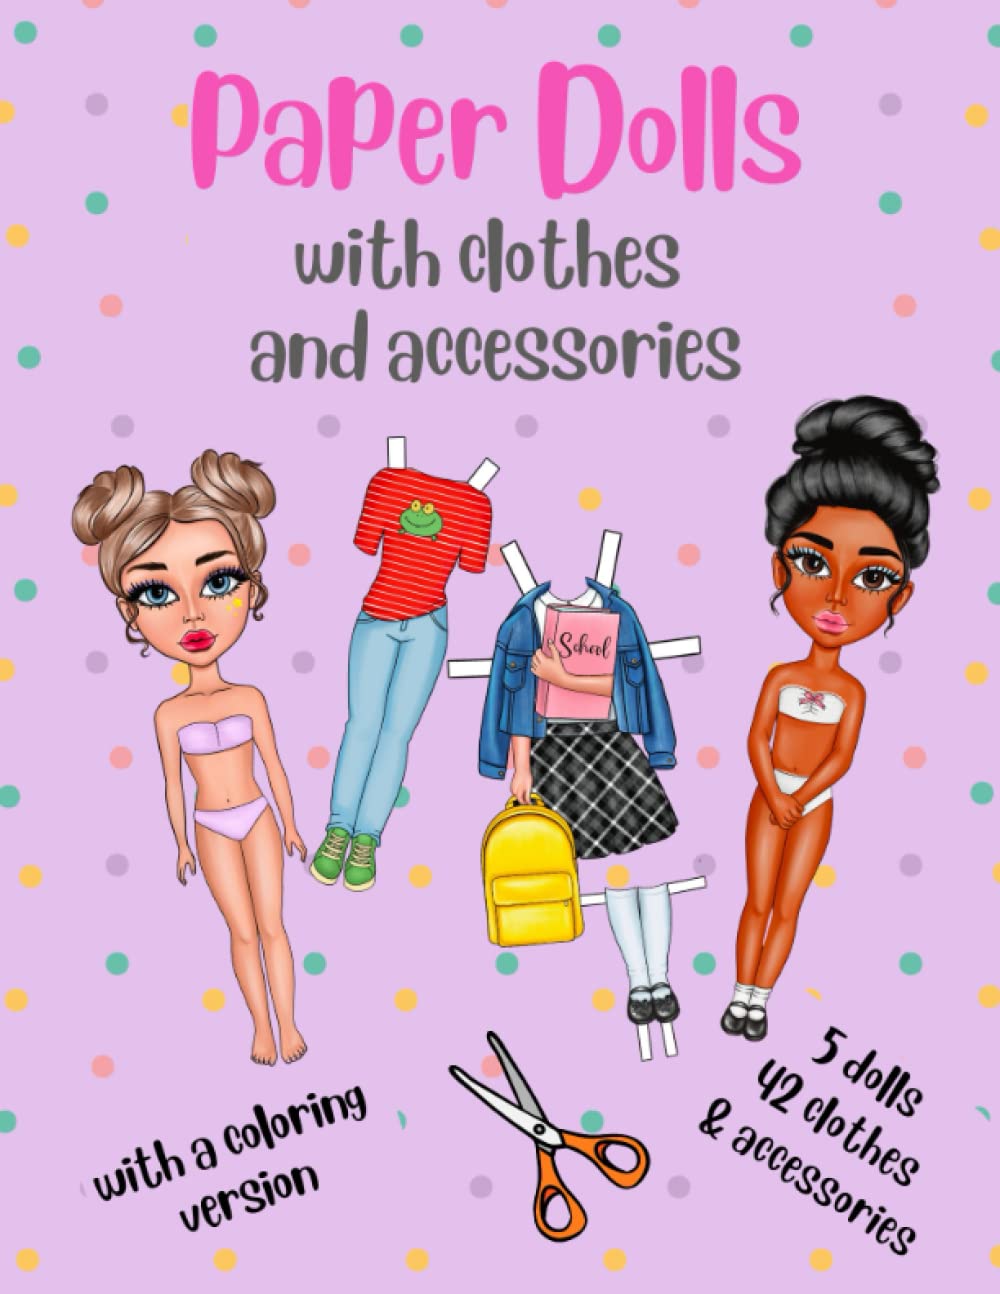 Paper Dolls with Clothes and Accessories - 5 dolls 42 clothes & accessories with a Coloring Version for Girls ages 8-12: Cut out Paper Dolls for ... Doll Fashion Activity and Coloring Books